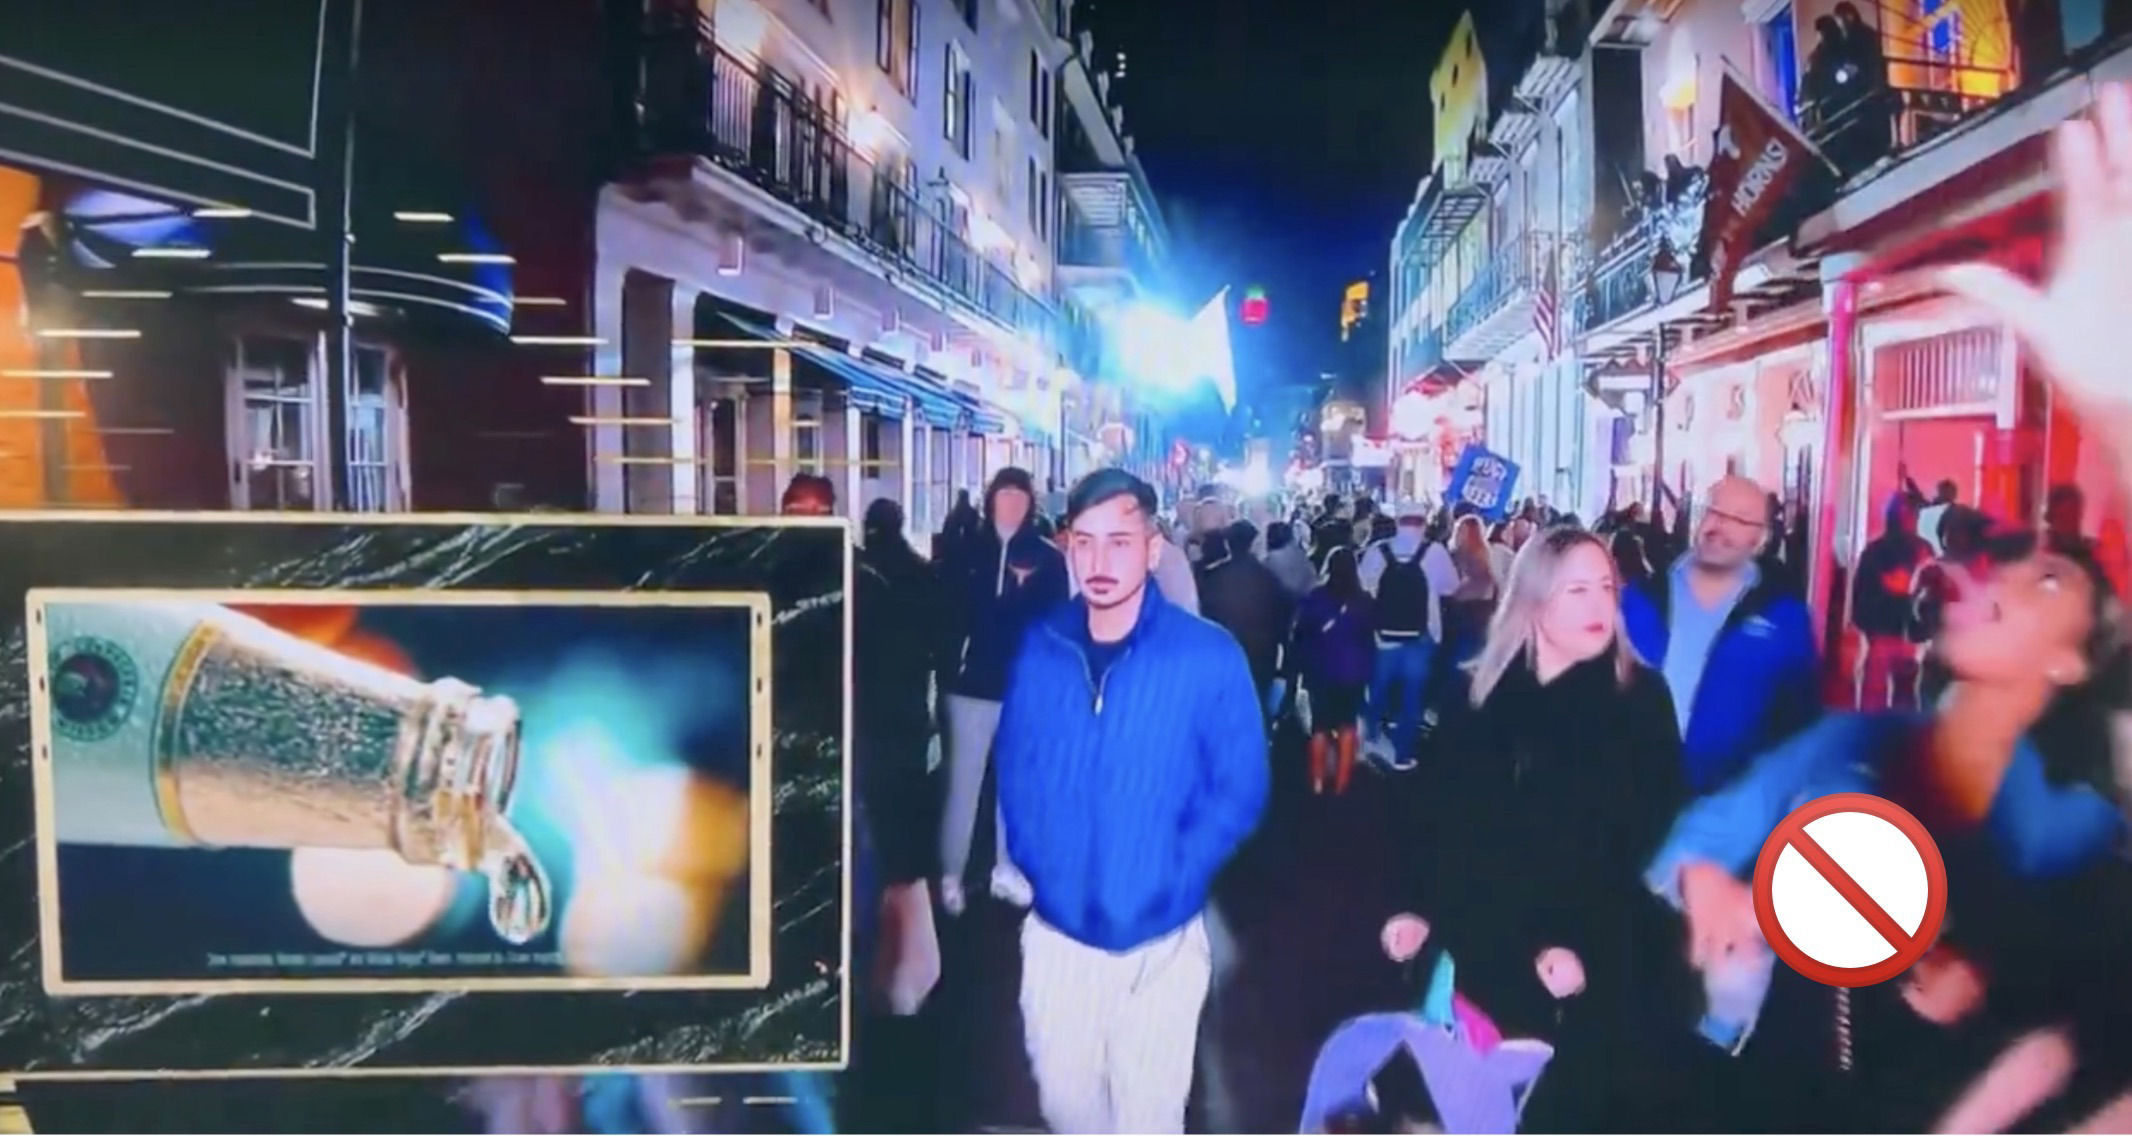 ESPN Apologizes After Showing a Woman Flashing on Bourbon Street During